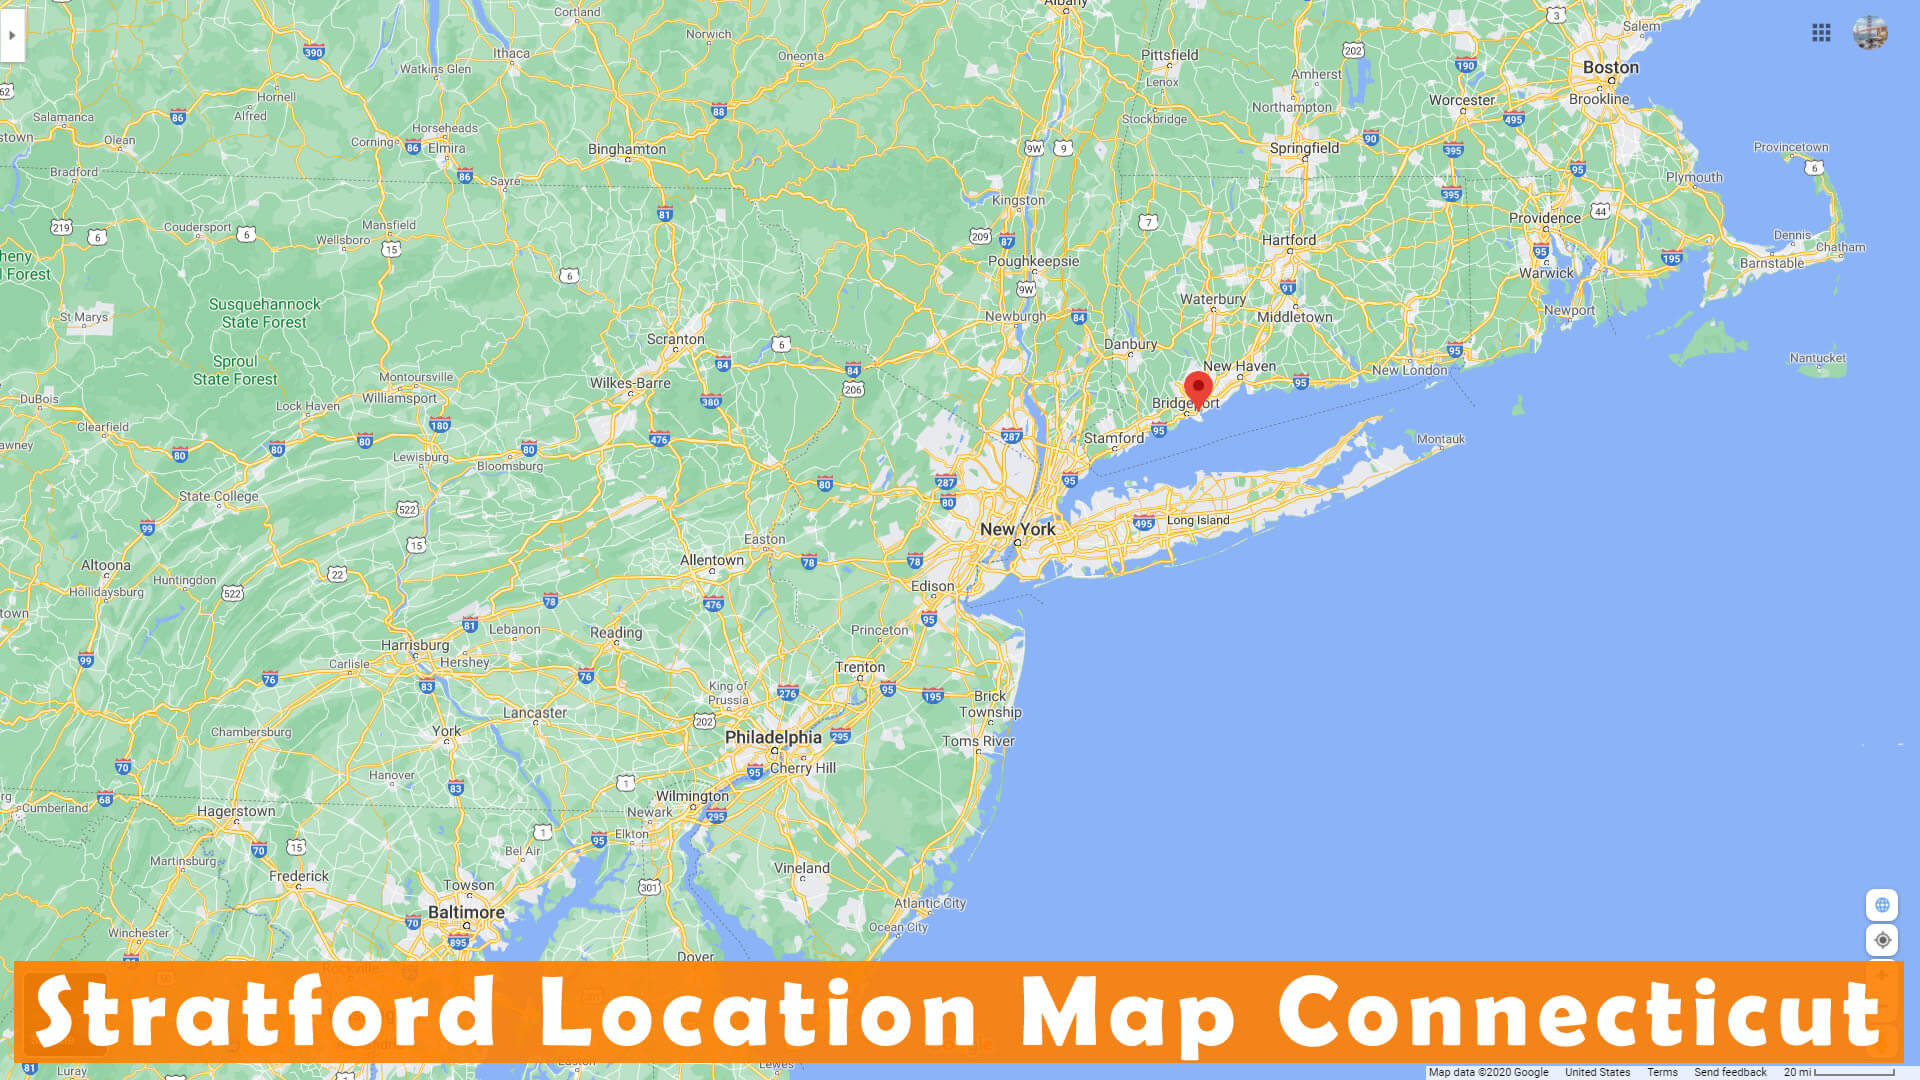 Stratford Location Map Connecticut